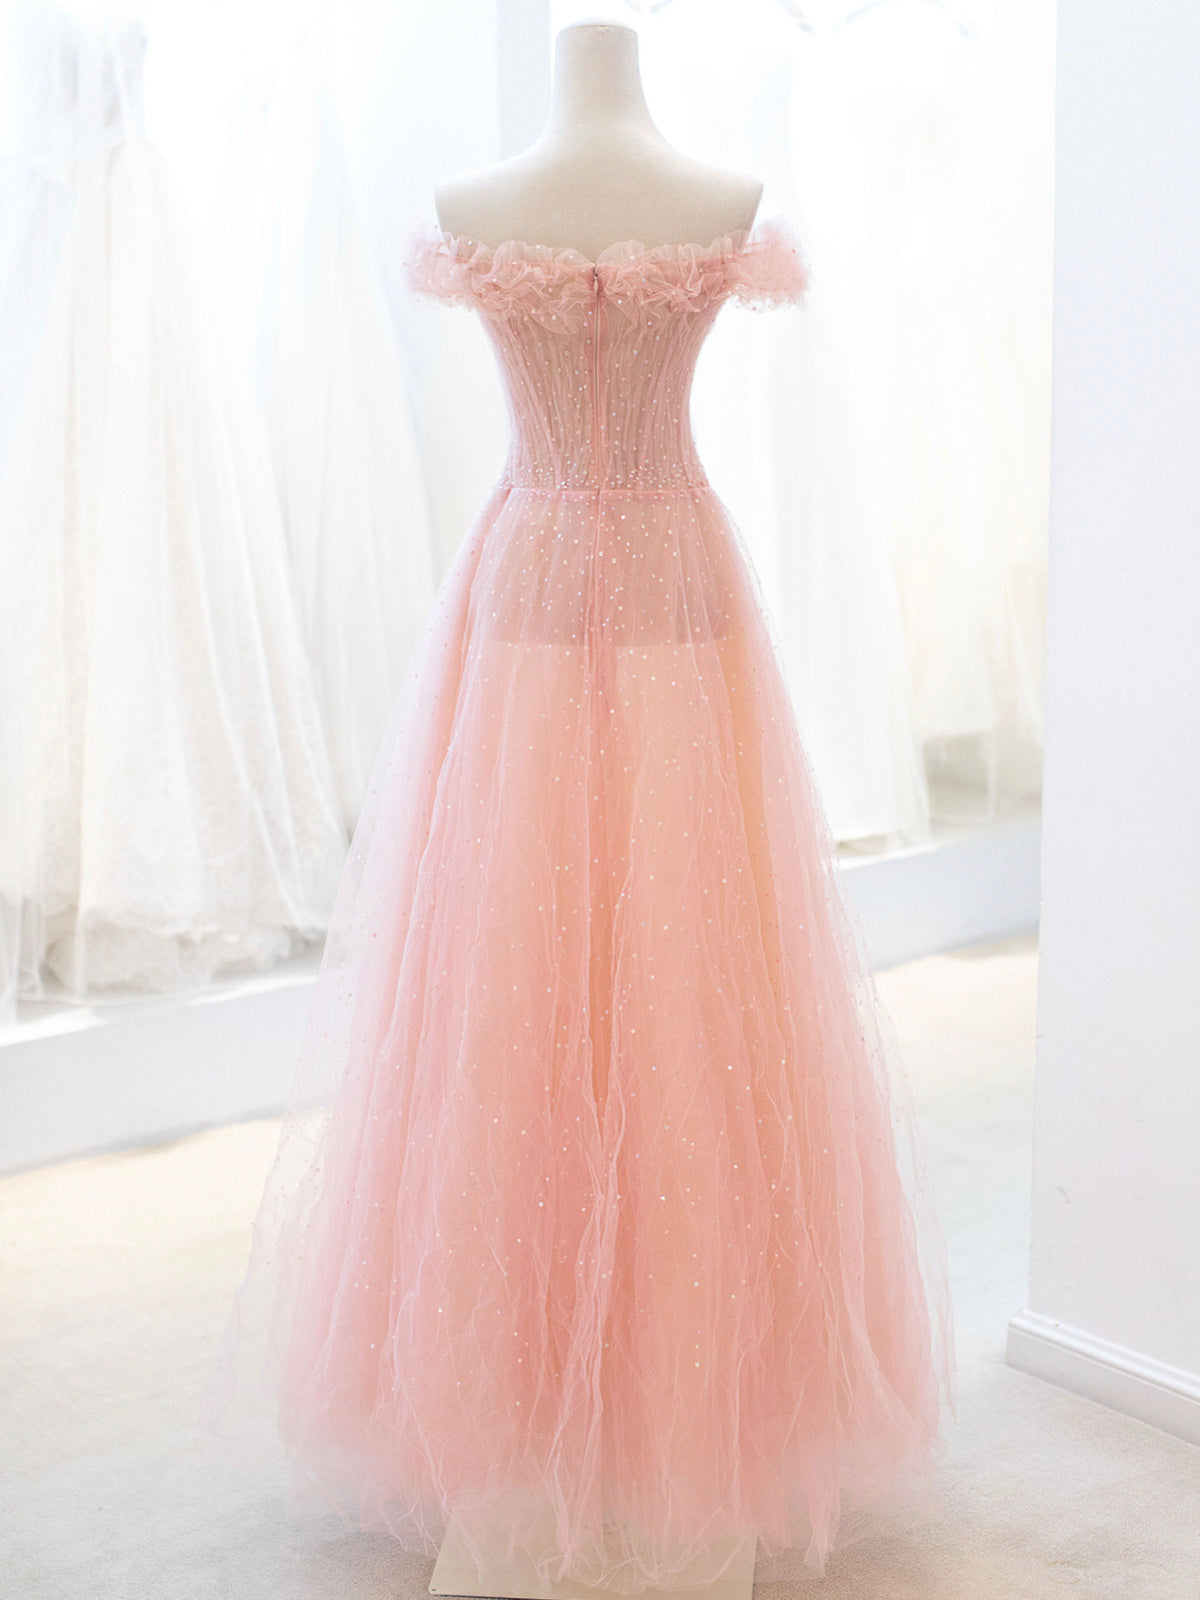 Homecoming Dress Cute, Pink Tulle Sequins Long Prom Dress, A-Line Lovely Evening Party Dress